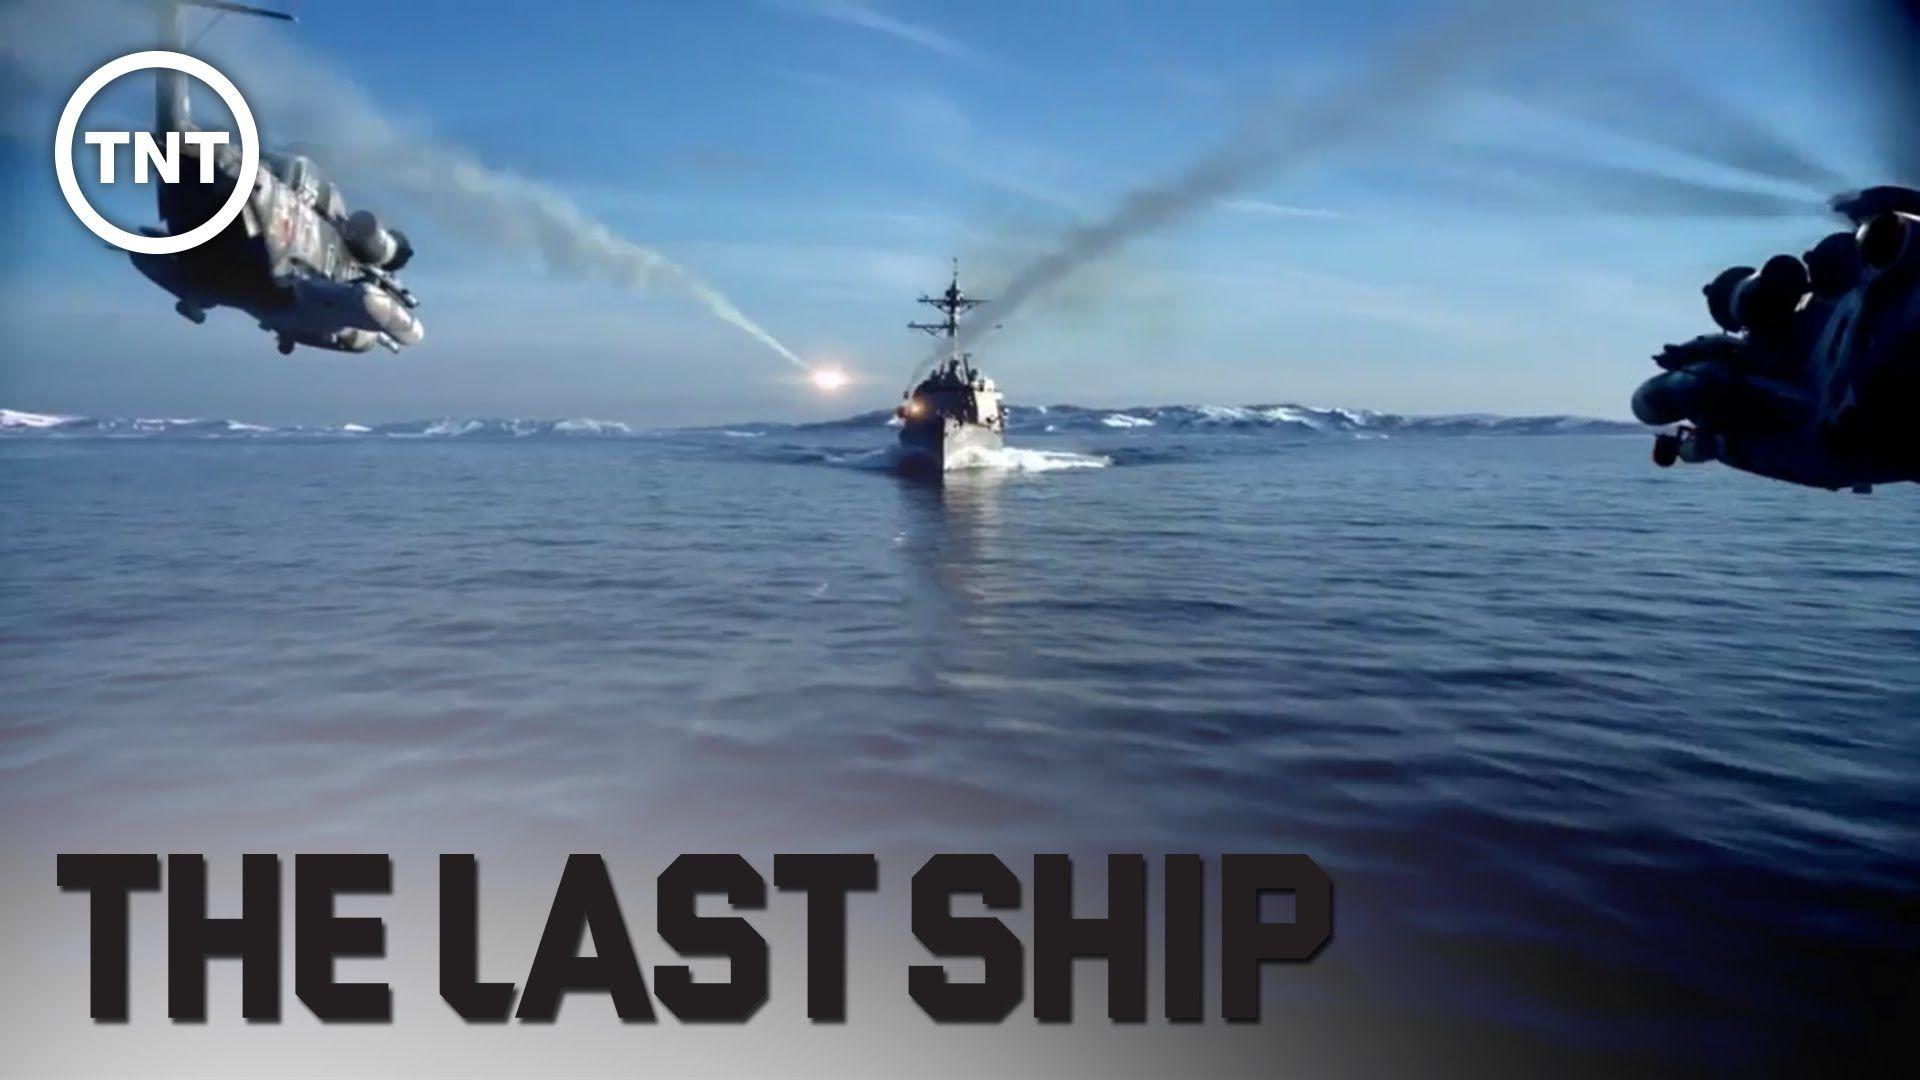 The Last Ship Wallpaper, 33 Best HD Background of The Last Ship